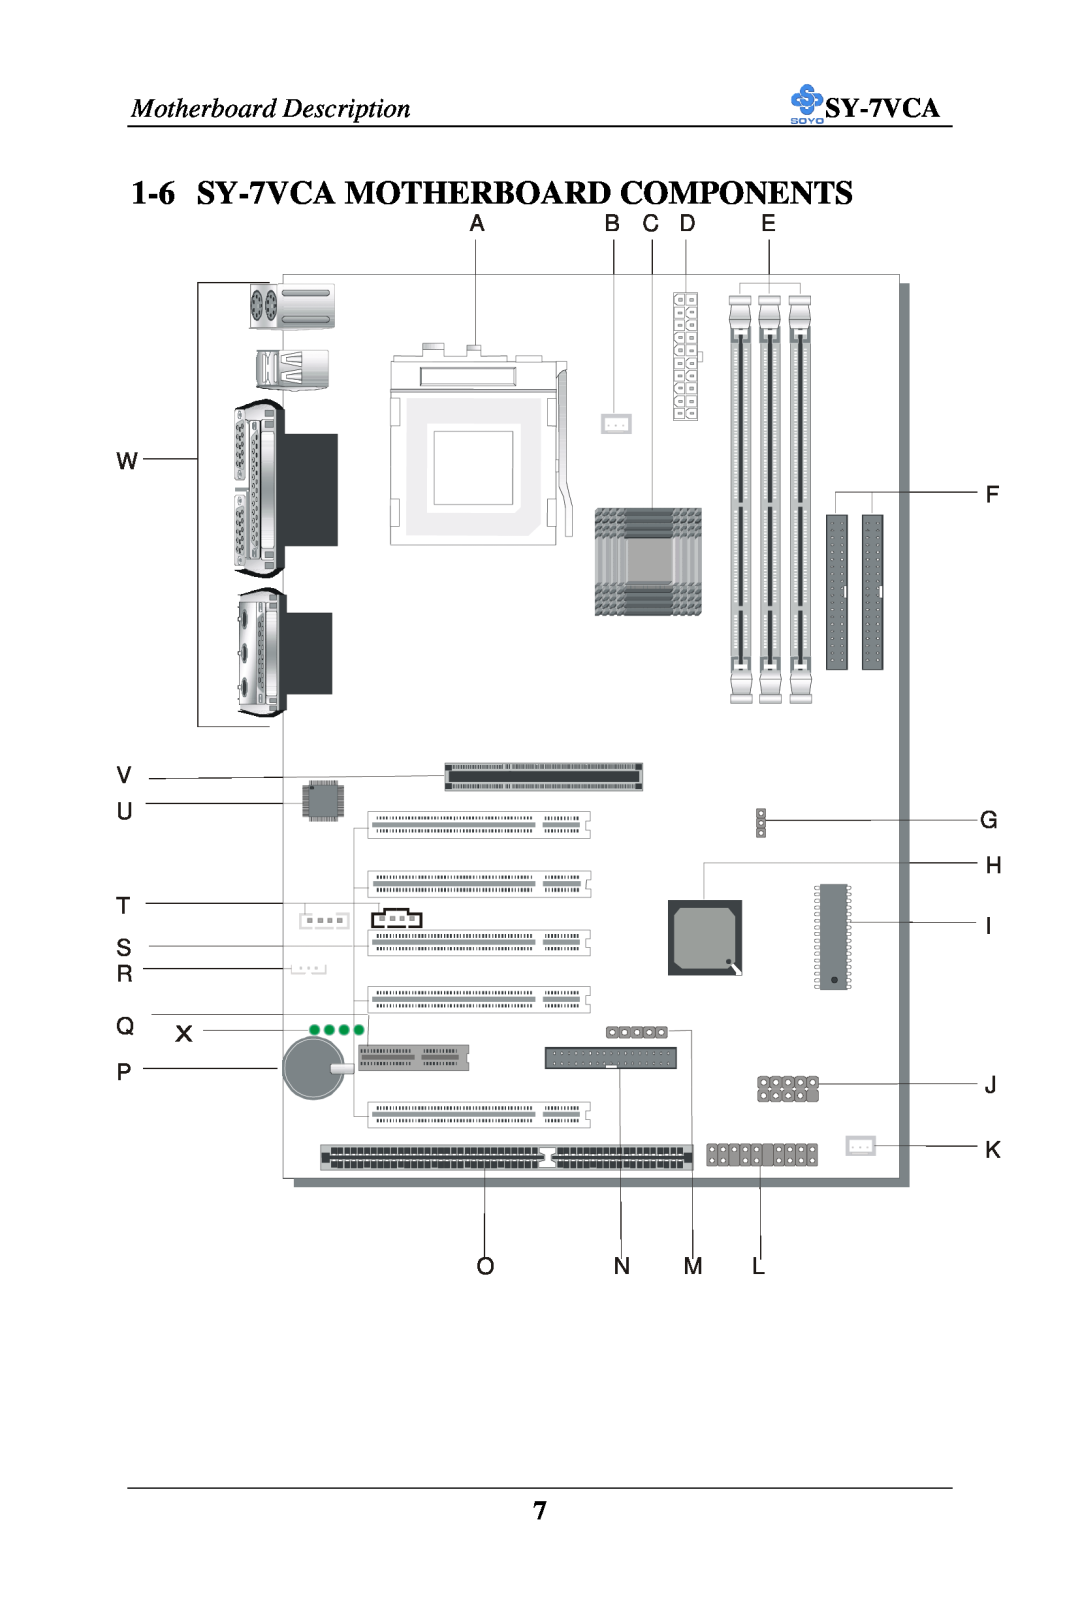 SOYO user manual 1-6 SY-7VCA MOTHERBOARD COMPONENTS, W V U T S R Q P, Ab C D E F, G H I J K, On M L, Sdram 